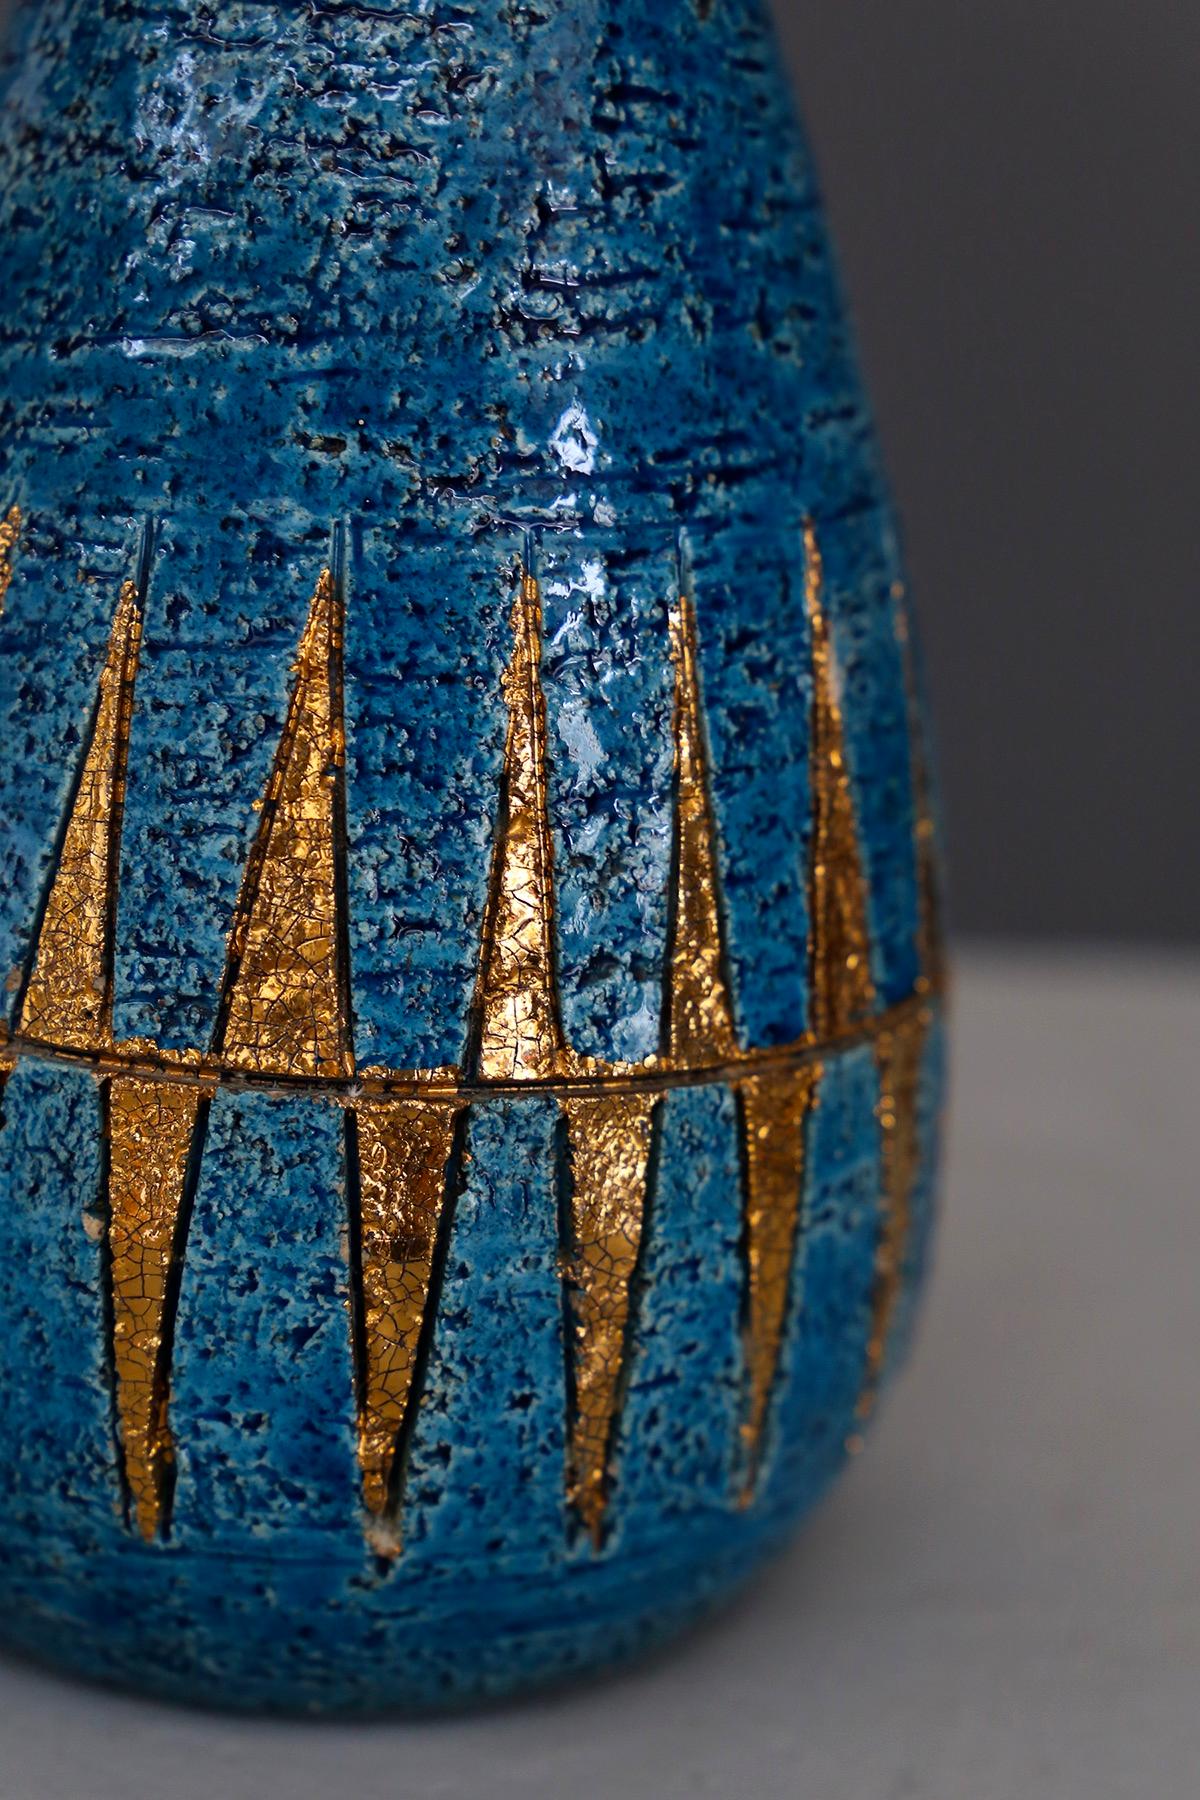 Mid-Century Modern Vintage Pottery Blue and Golden Ceramic by Aldo Londi for Bitossi, 1960s